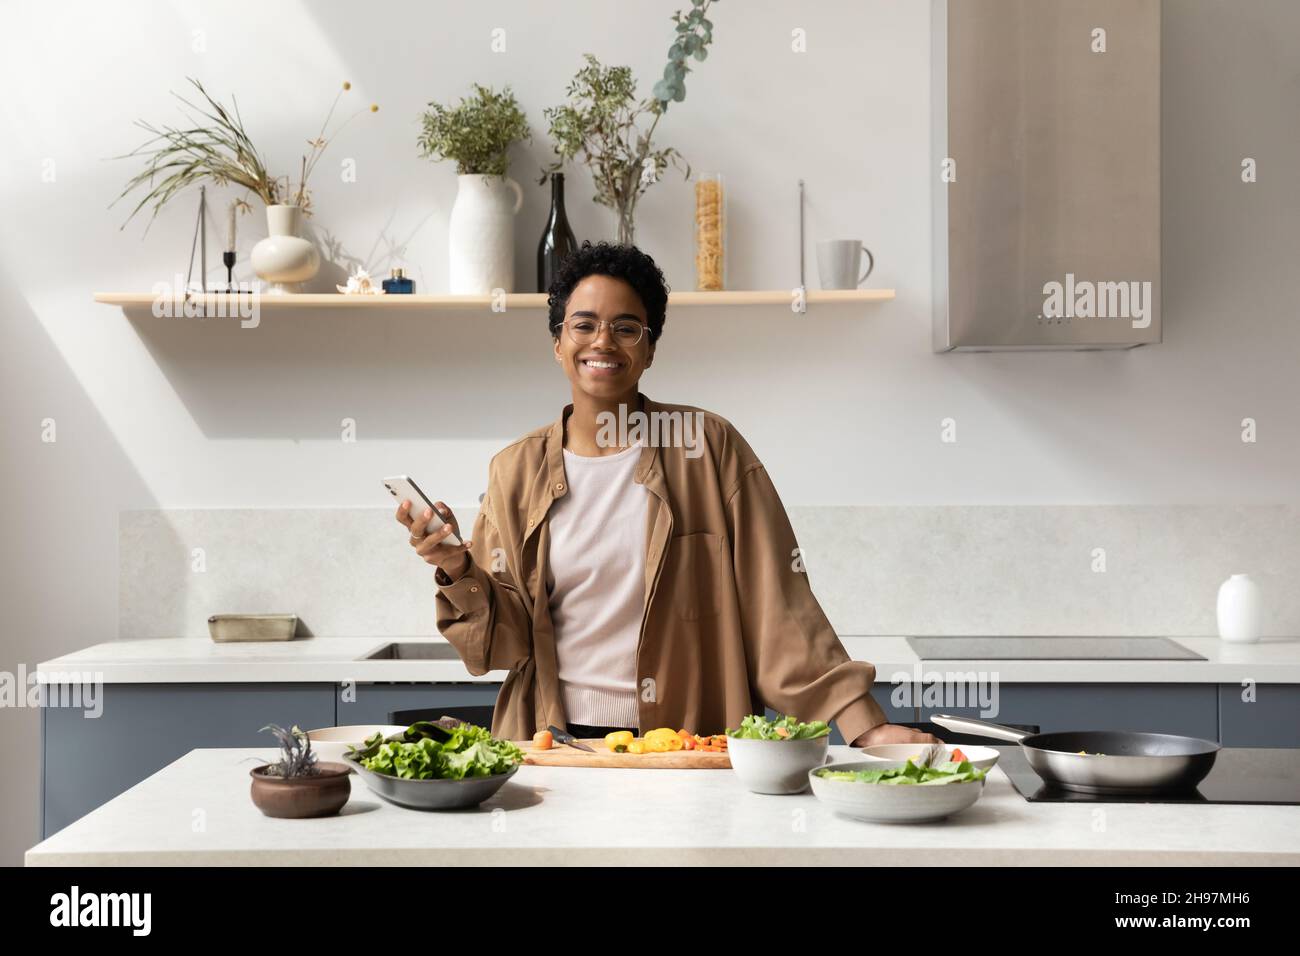 Happy African American woman holding cellphone, posing in kitchen. Stock Photo